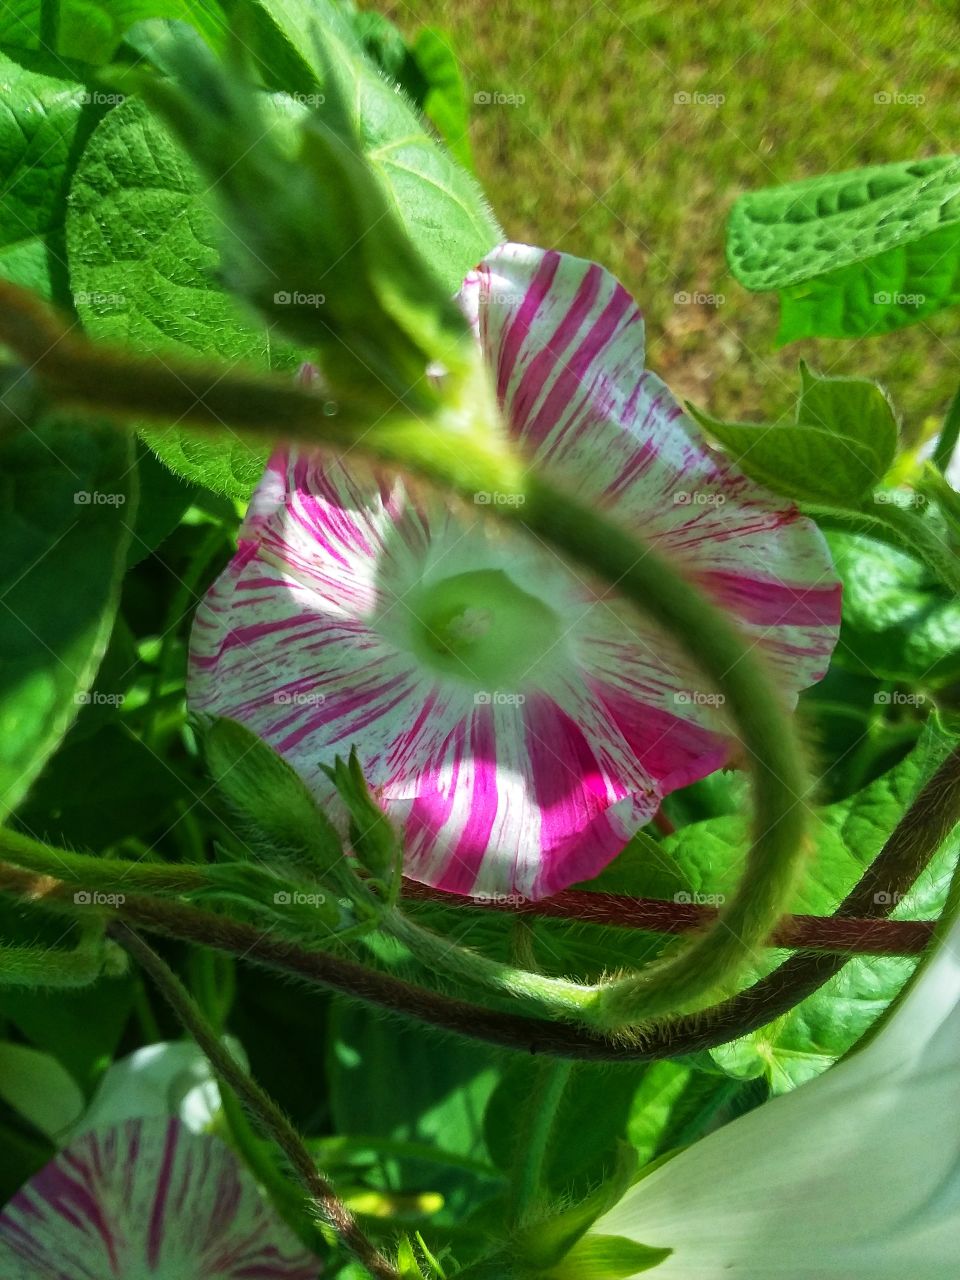 Vibrant Colorful 'Carnevale Di Venezia' morning glory. Picture taken just after blooming one fine morning.